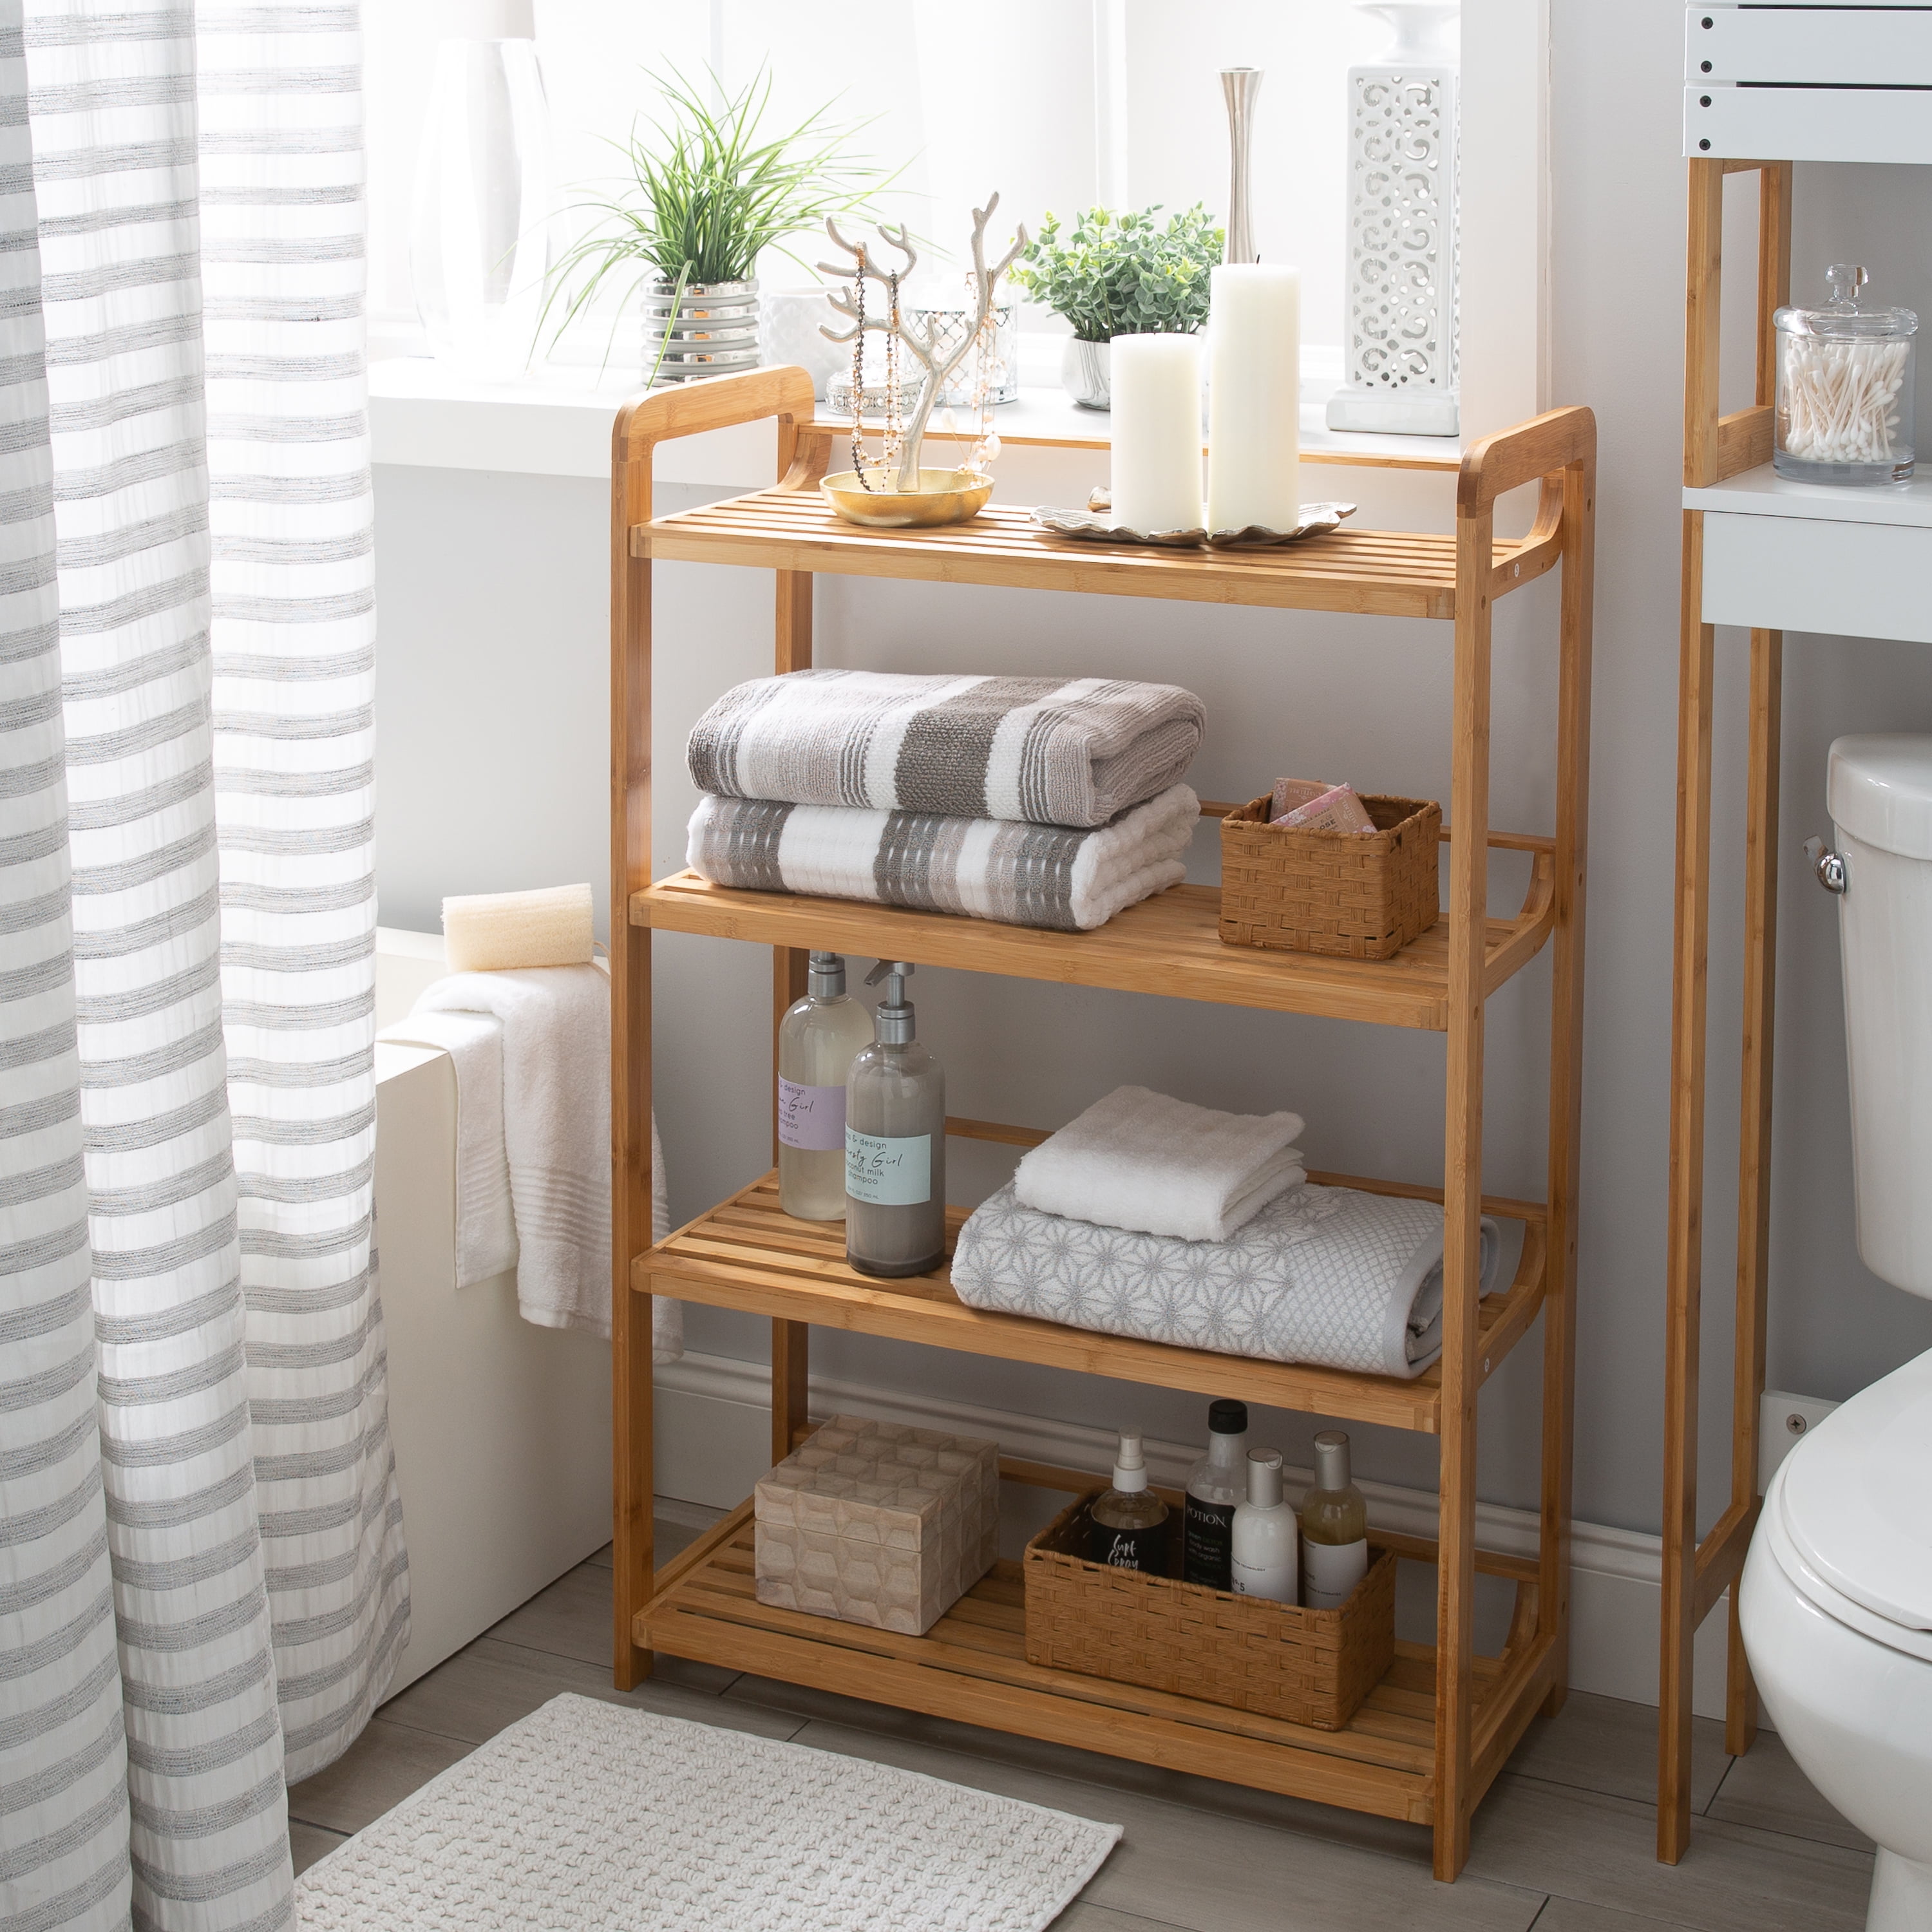 ORGANIZE IT ALL Bamboo Deluxe 3 Tier Bathroom Caddy nh-29948W-1 - The Home  Depot